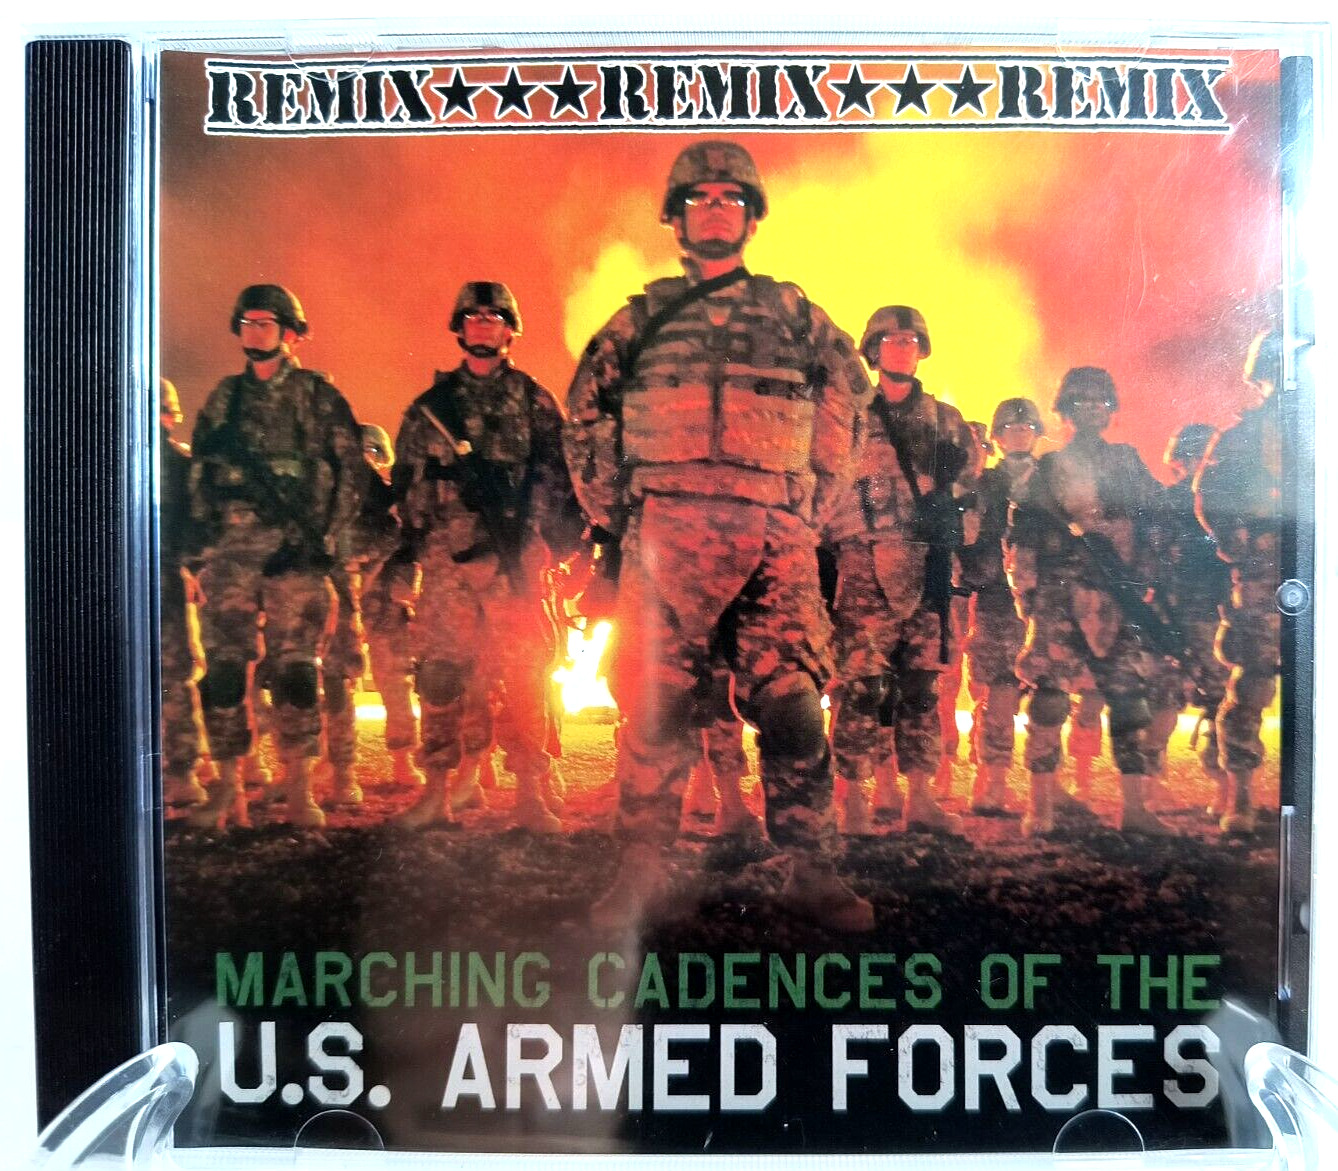 Rare: Marching Cadences of the U.S. Armed Forces-Remix CD 2010